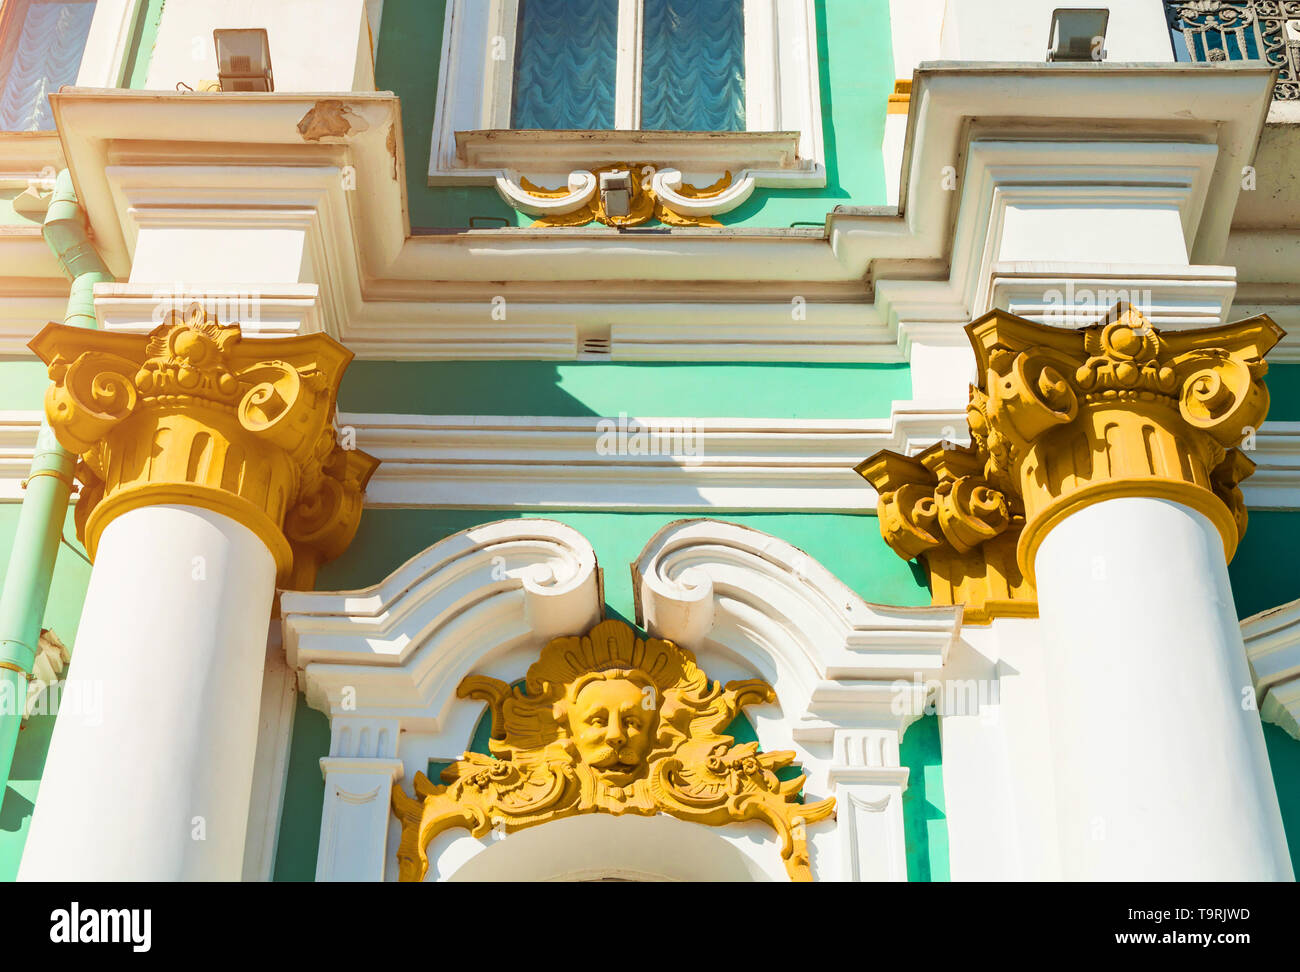 St Petersburg, Russia - April 5, 2019. Winter Palace and Hermitage Museum Building, closeup facade view Stock Photo